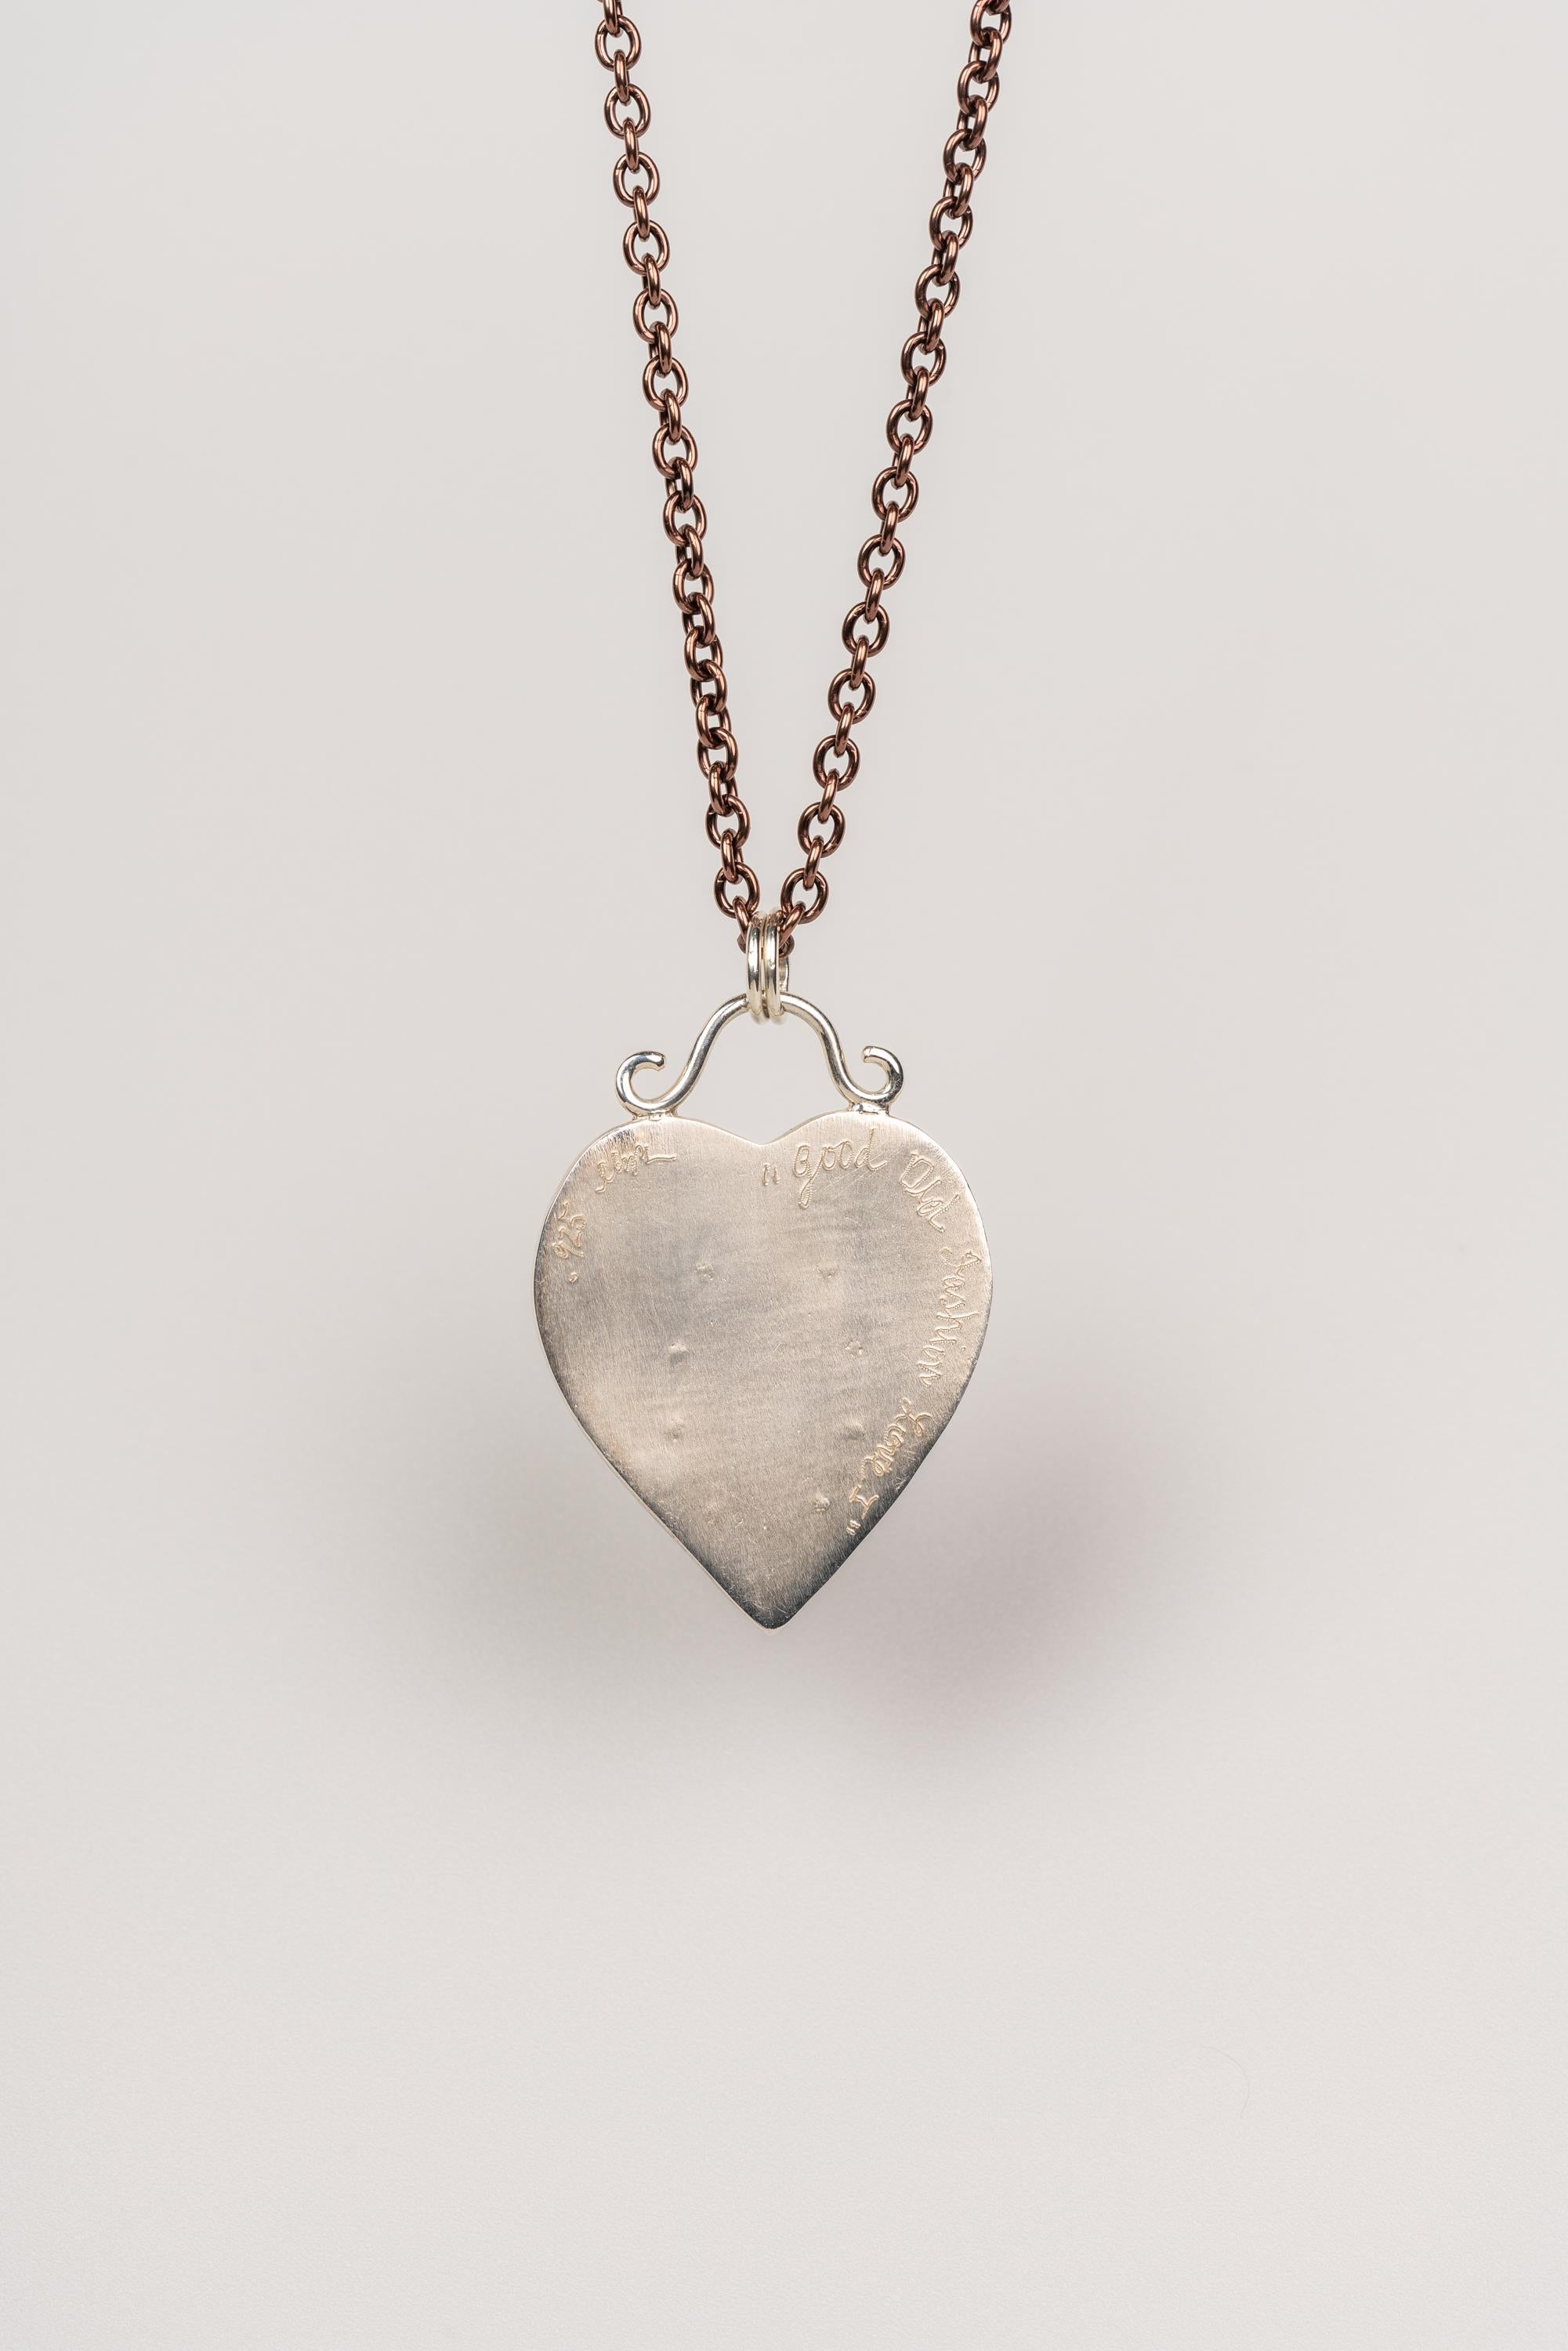 Contemporary Sterling Silver and Rusted Iron Heart Necklace with Marcasite